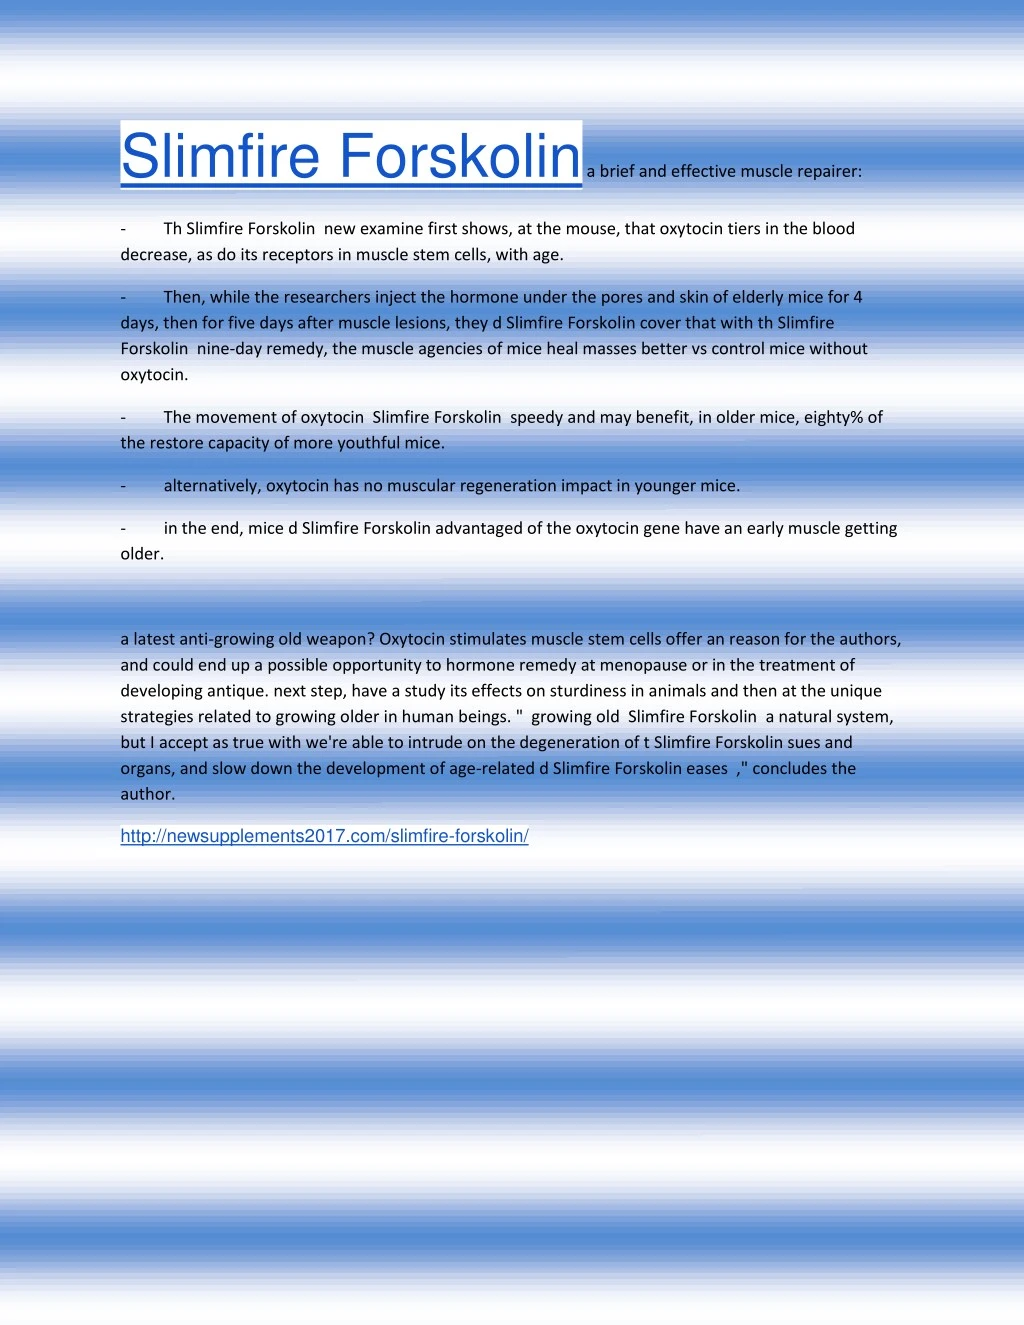 slimfire forskolin a brief and effective muscle